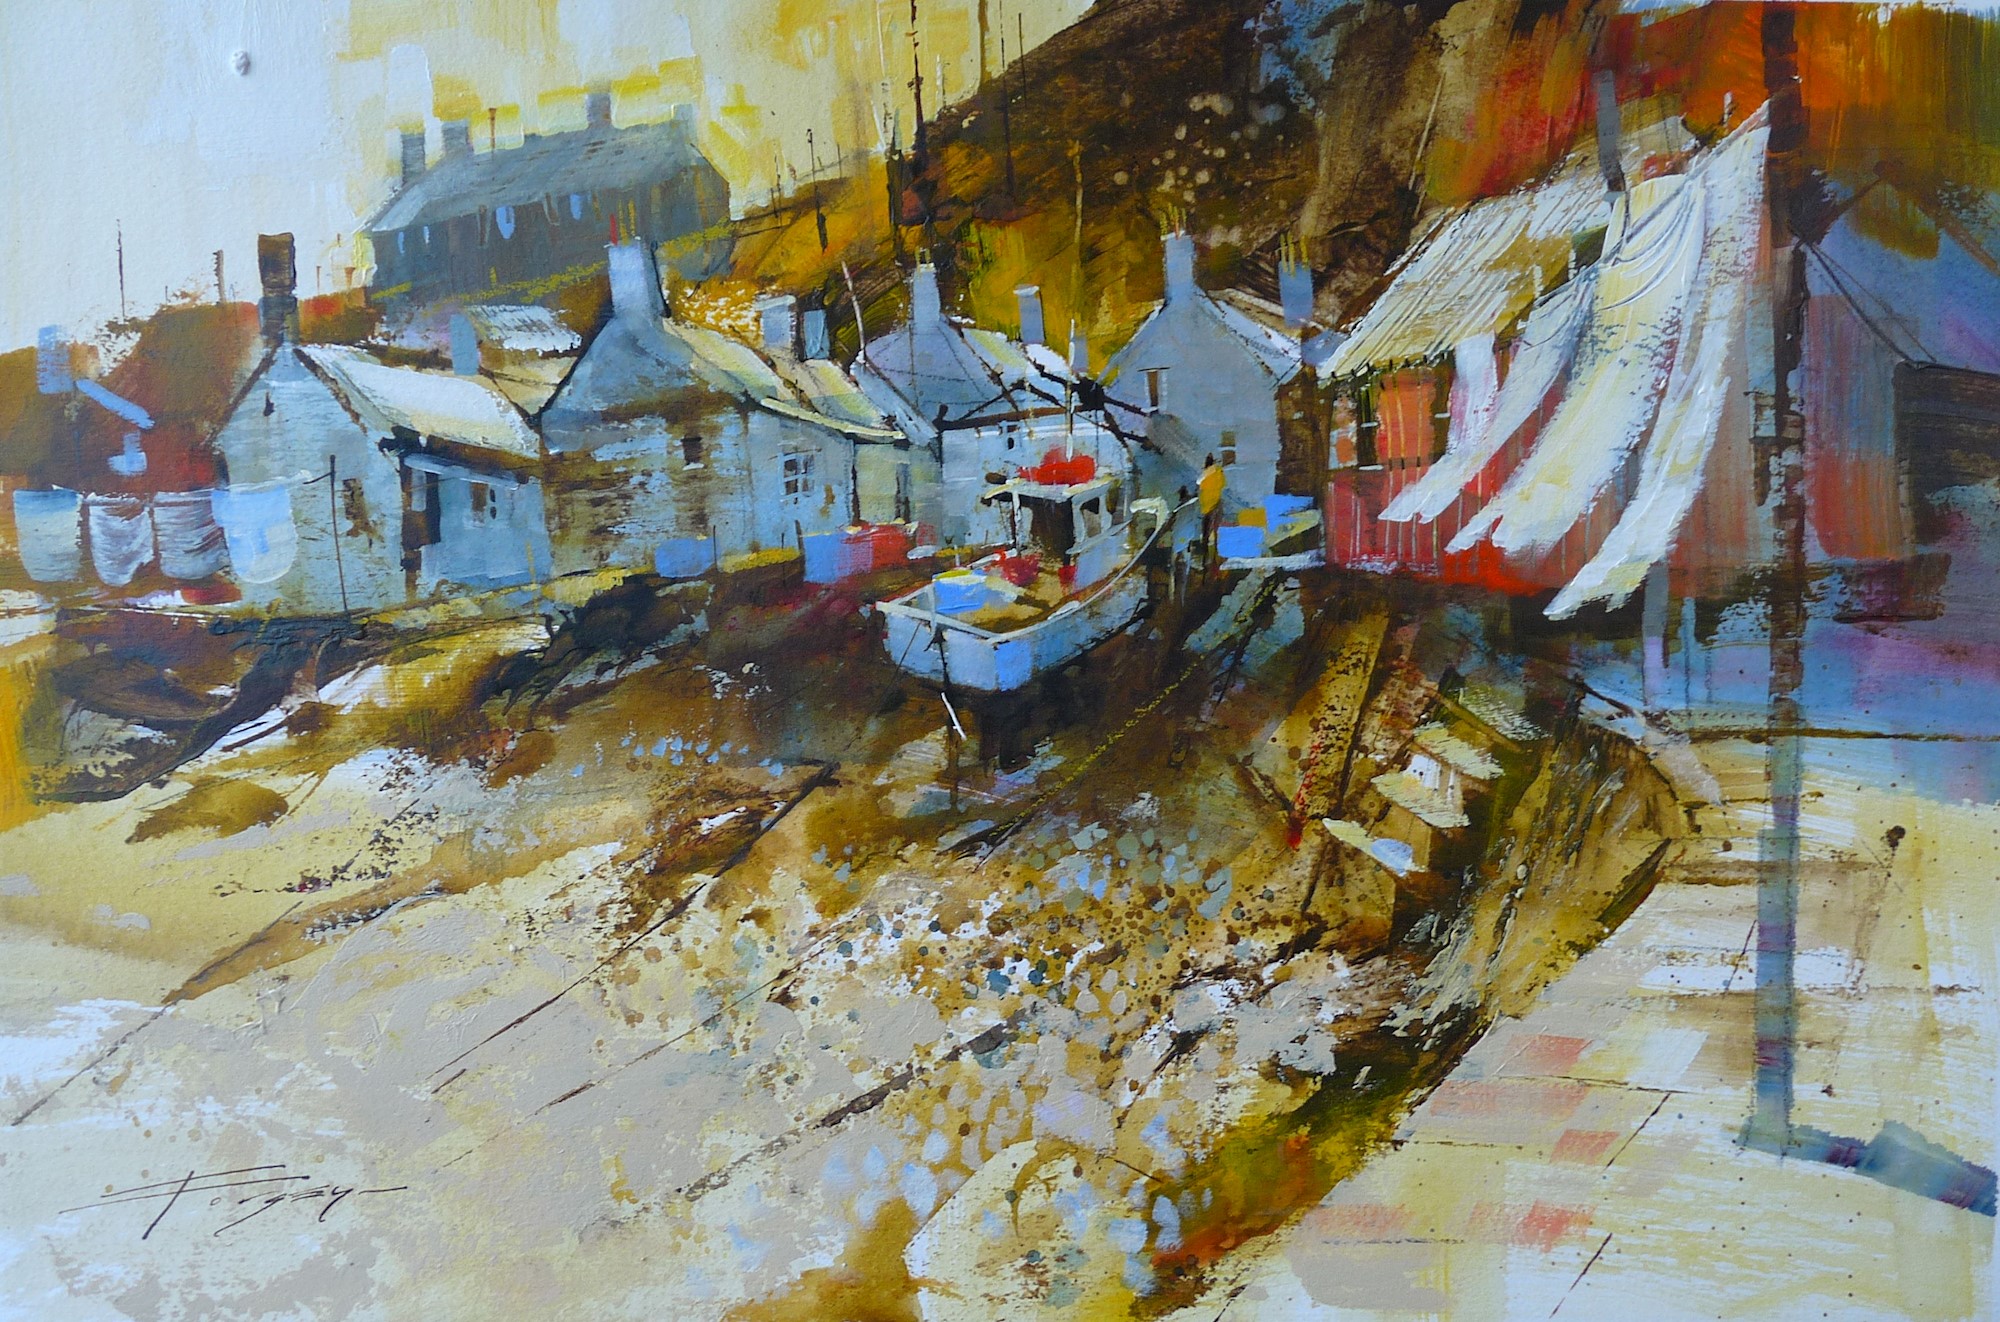 'Blowing in the Sun, Sandend' by artist Chris Forsey